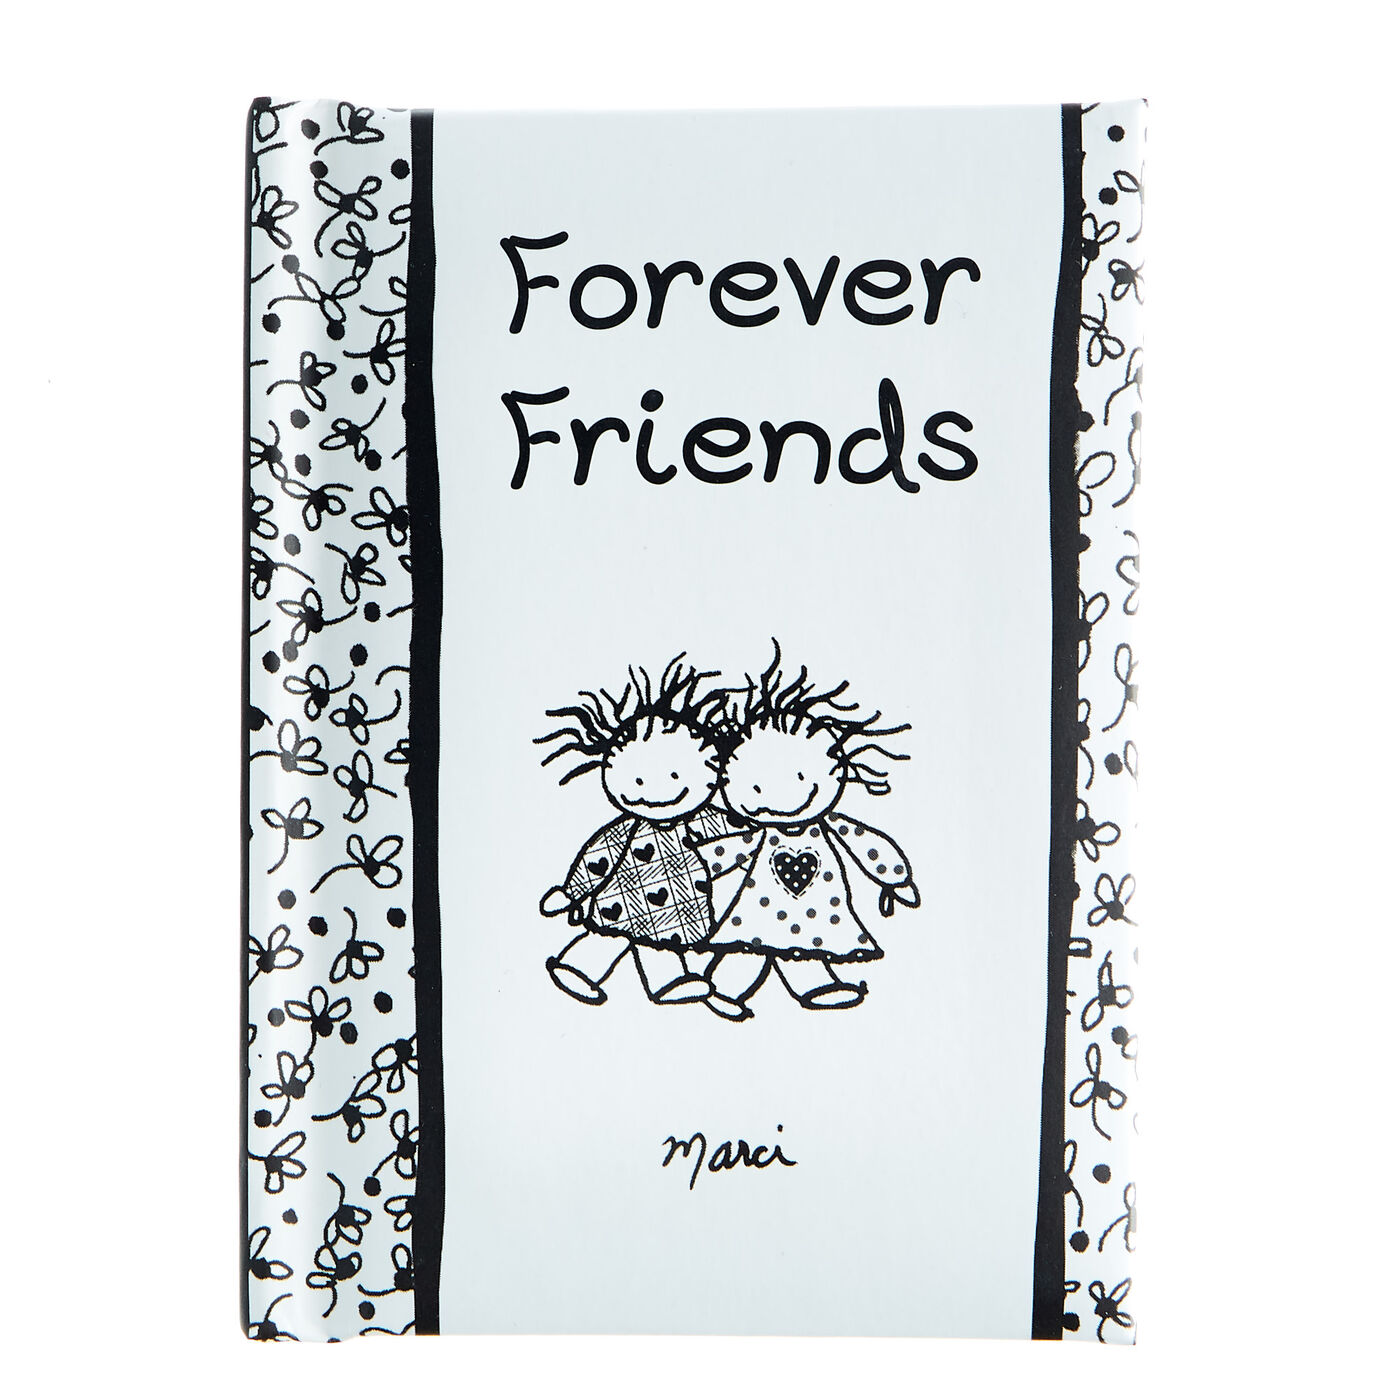 Maurice name meaning : Happiness: Lined Maurice Friends/Love Forever,  international friendship day gifts for best friends /120, 6x9 Professional  Design : Boys, Bask: : Books